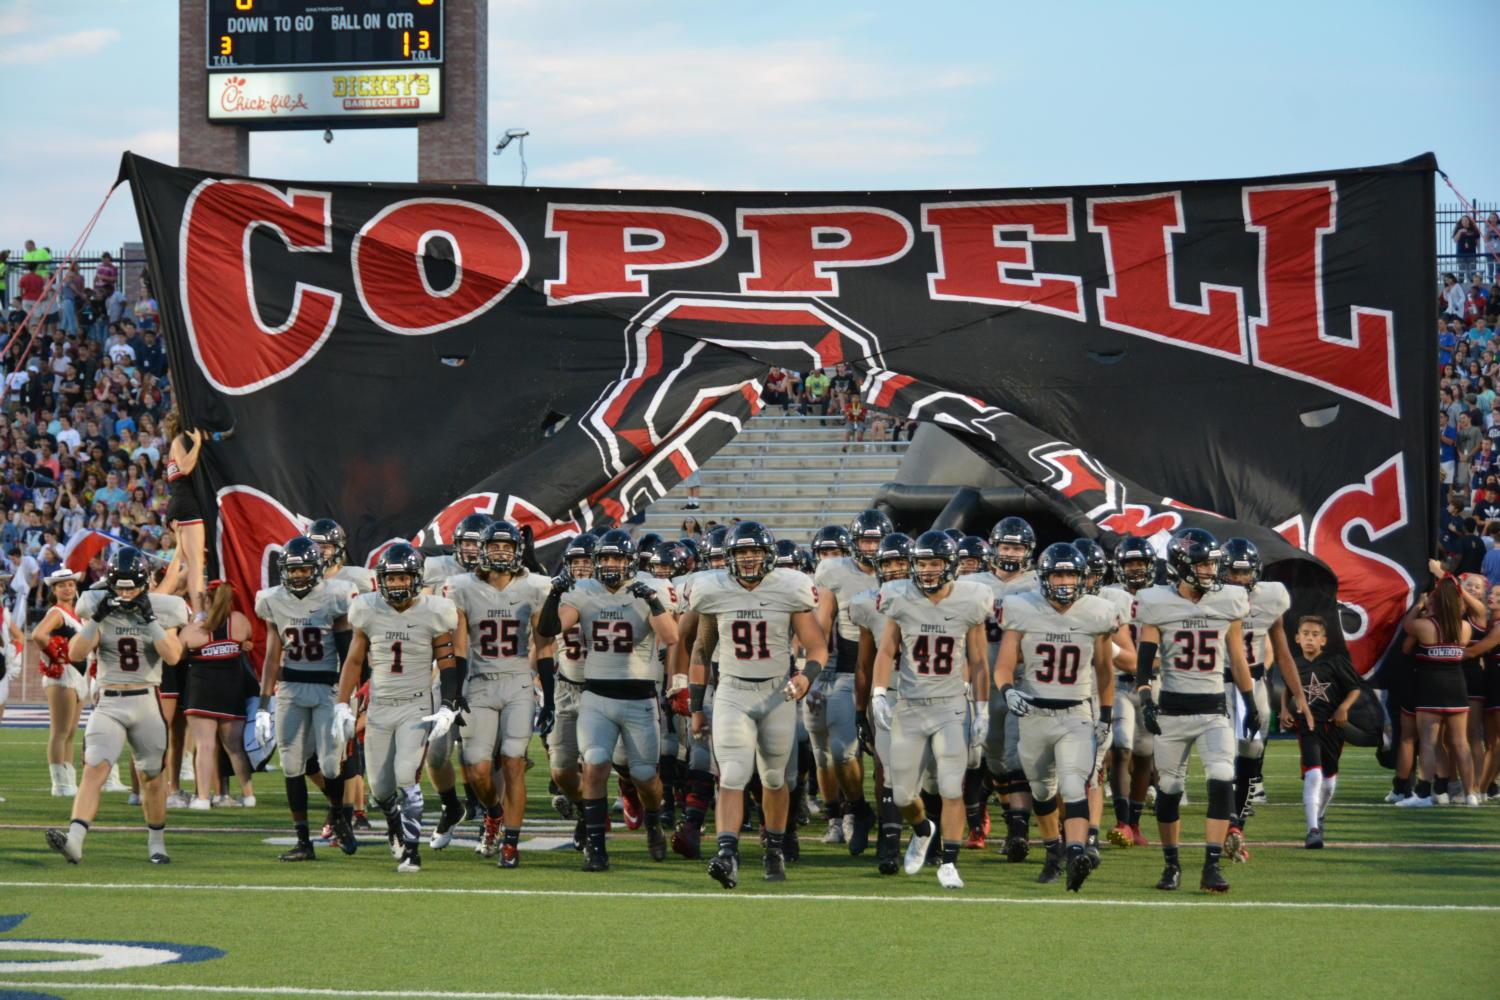 The+Coppell+Cowboys+march+their+way+out+onto+the+field+Friday+night+against+the+Allen+Eagles.+The+Cowboys+lost+35-23+to+the+state-ranked+team.